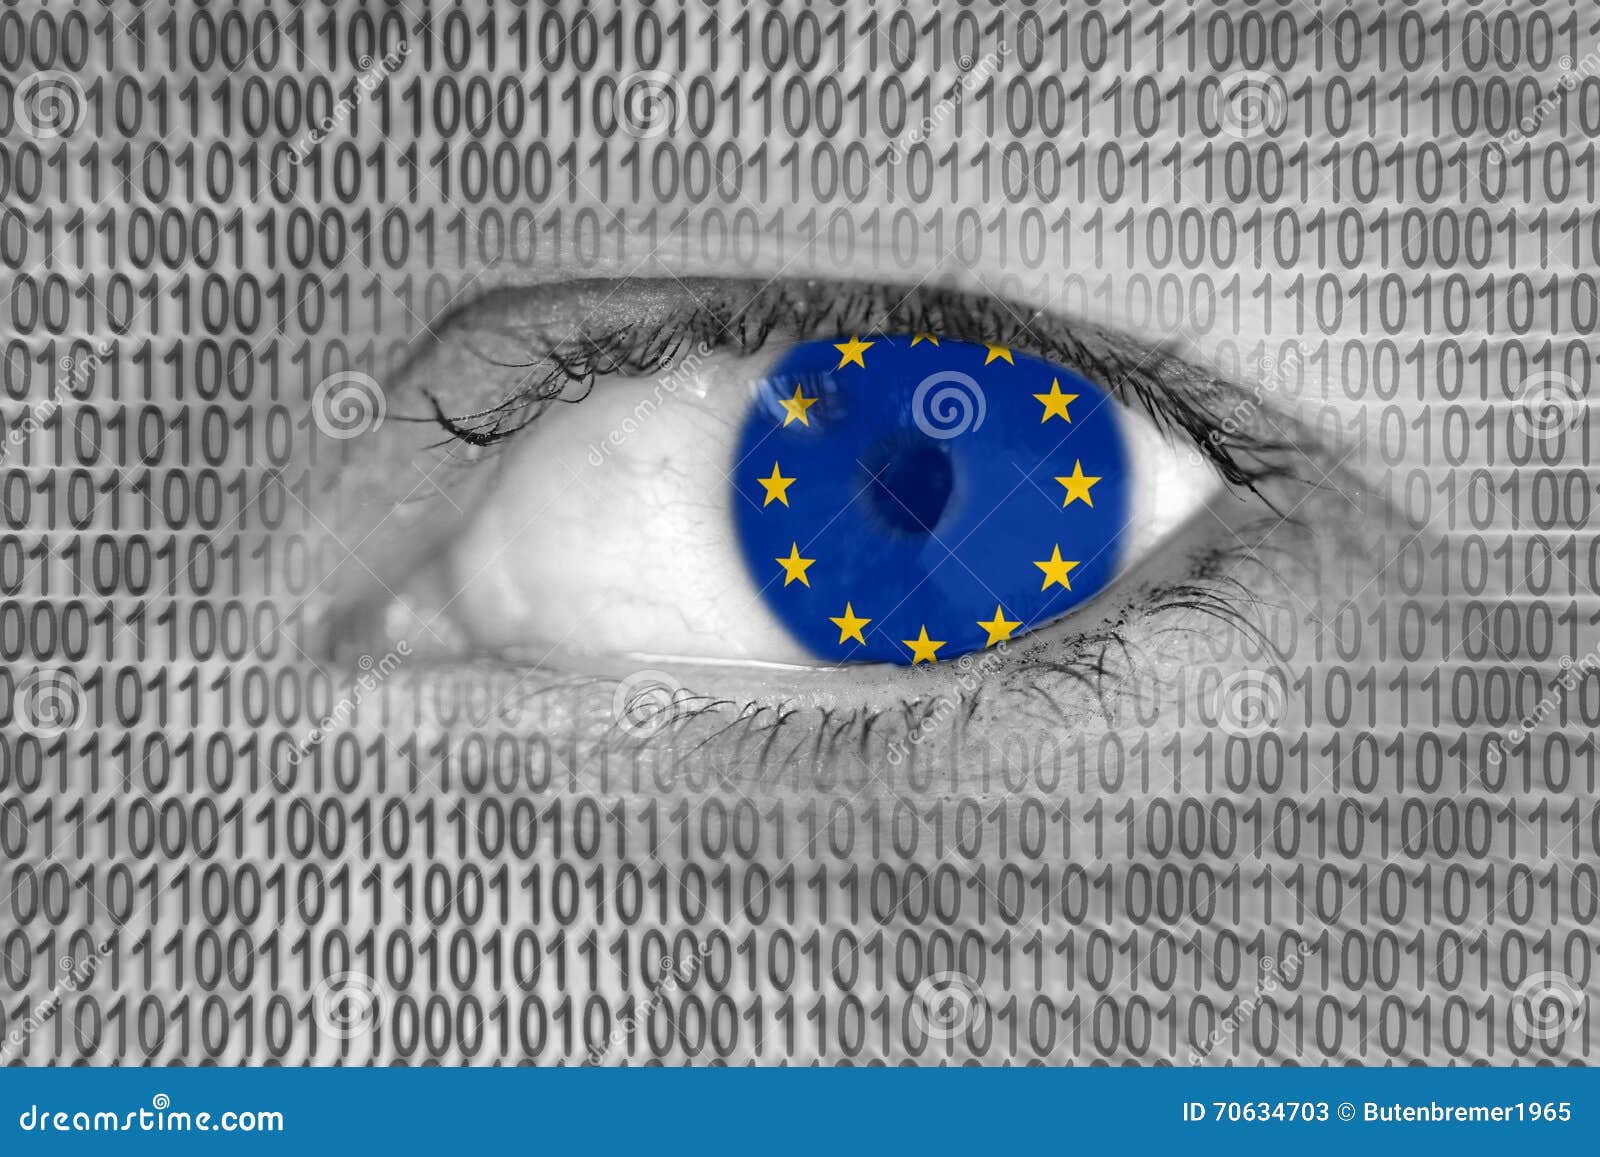 woman's eye with flag of eu european union and binary code numbers